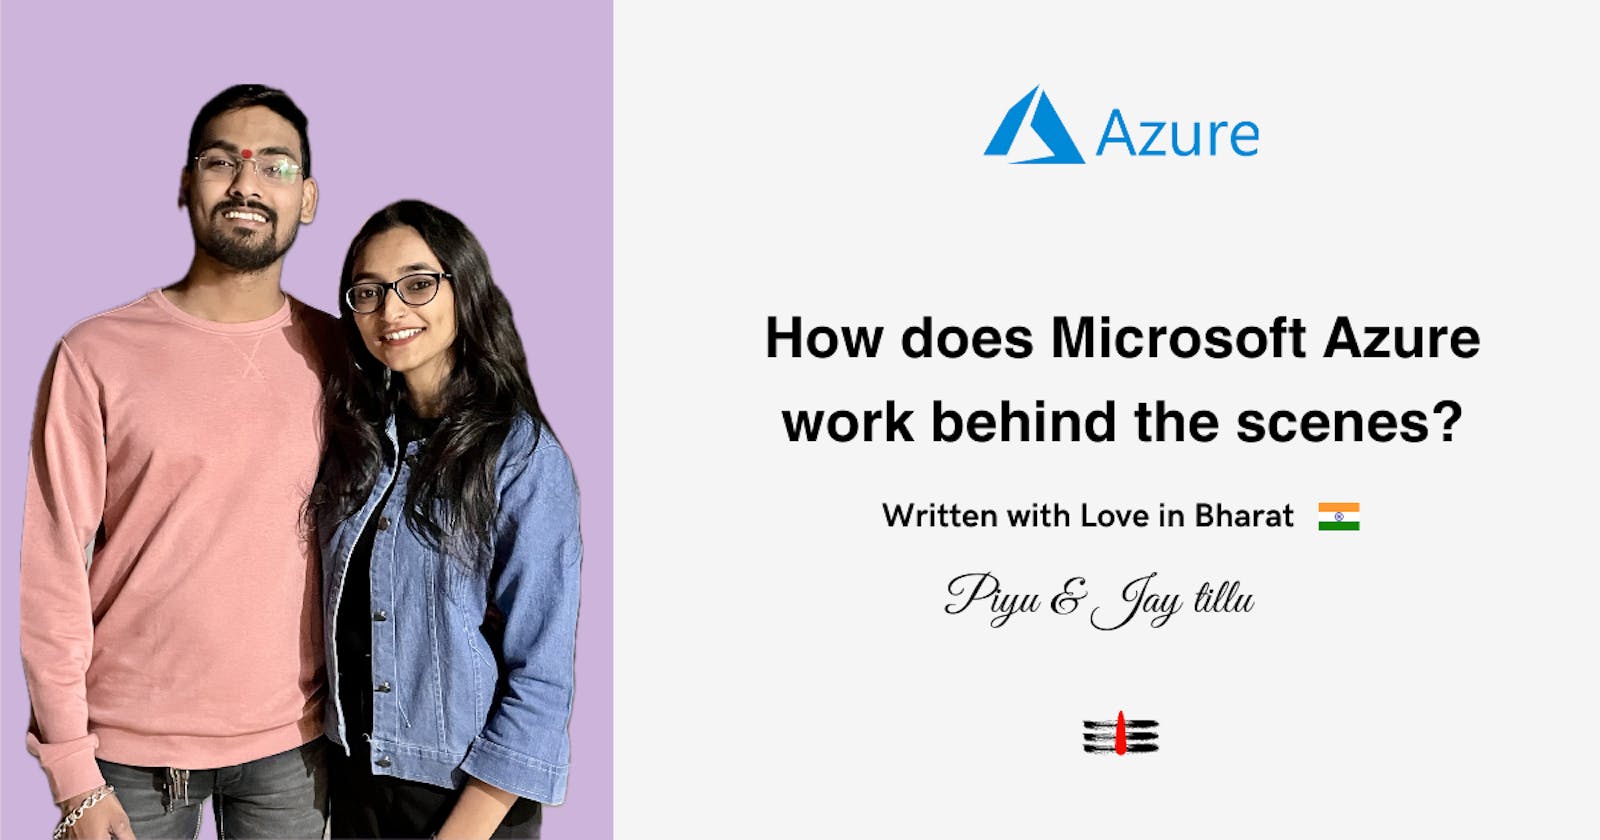 How does Microsoft Azure work behind the scenes?